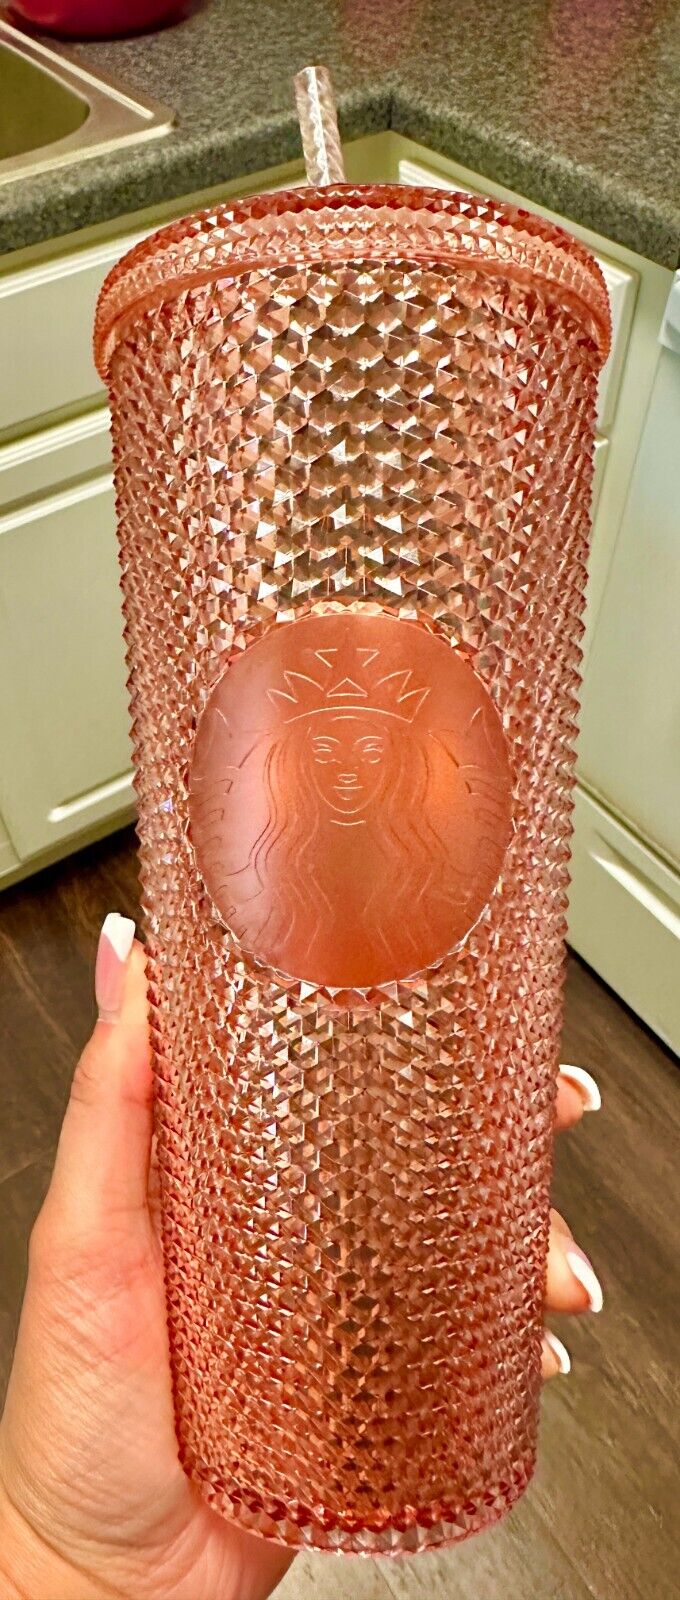 ✨✨ RARE Collectors 2018 *FIRST* EDITION Starbucks Rose Gold Studded Cup 24 Oz ✨✨